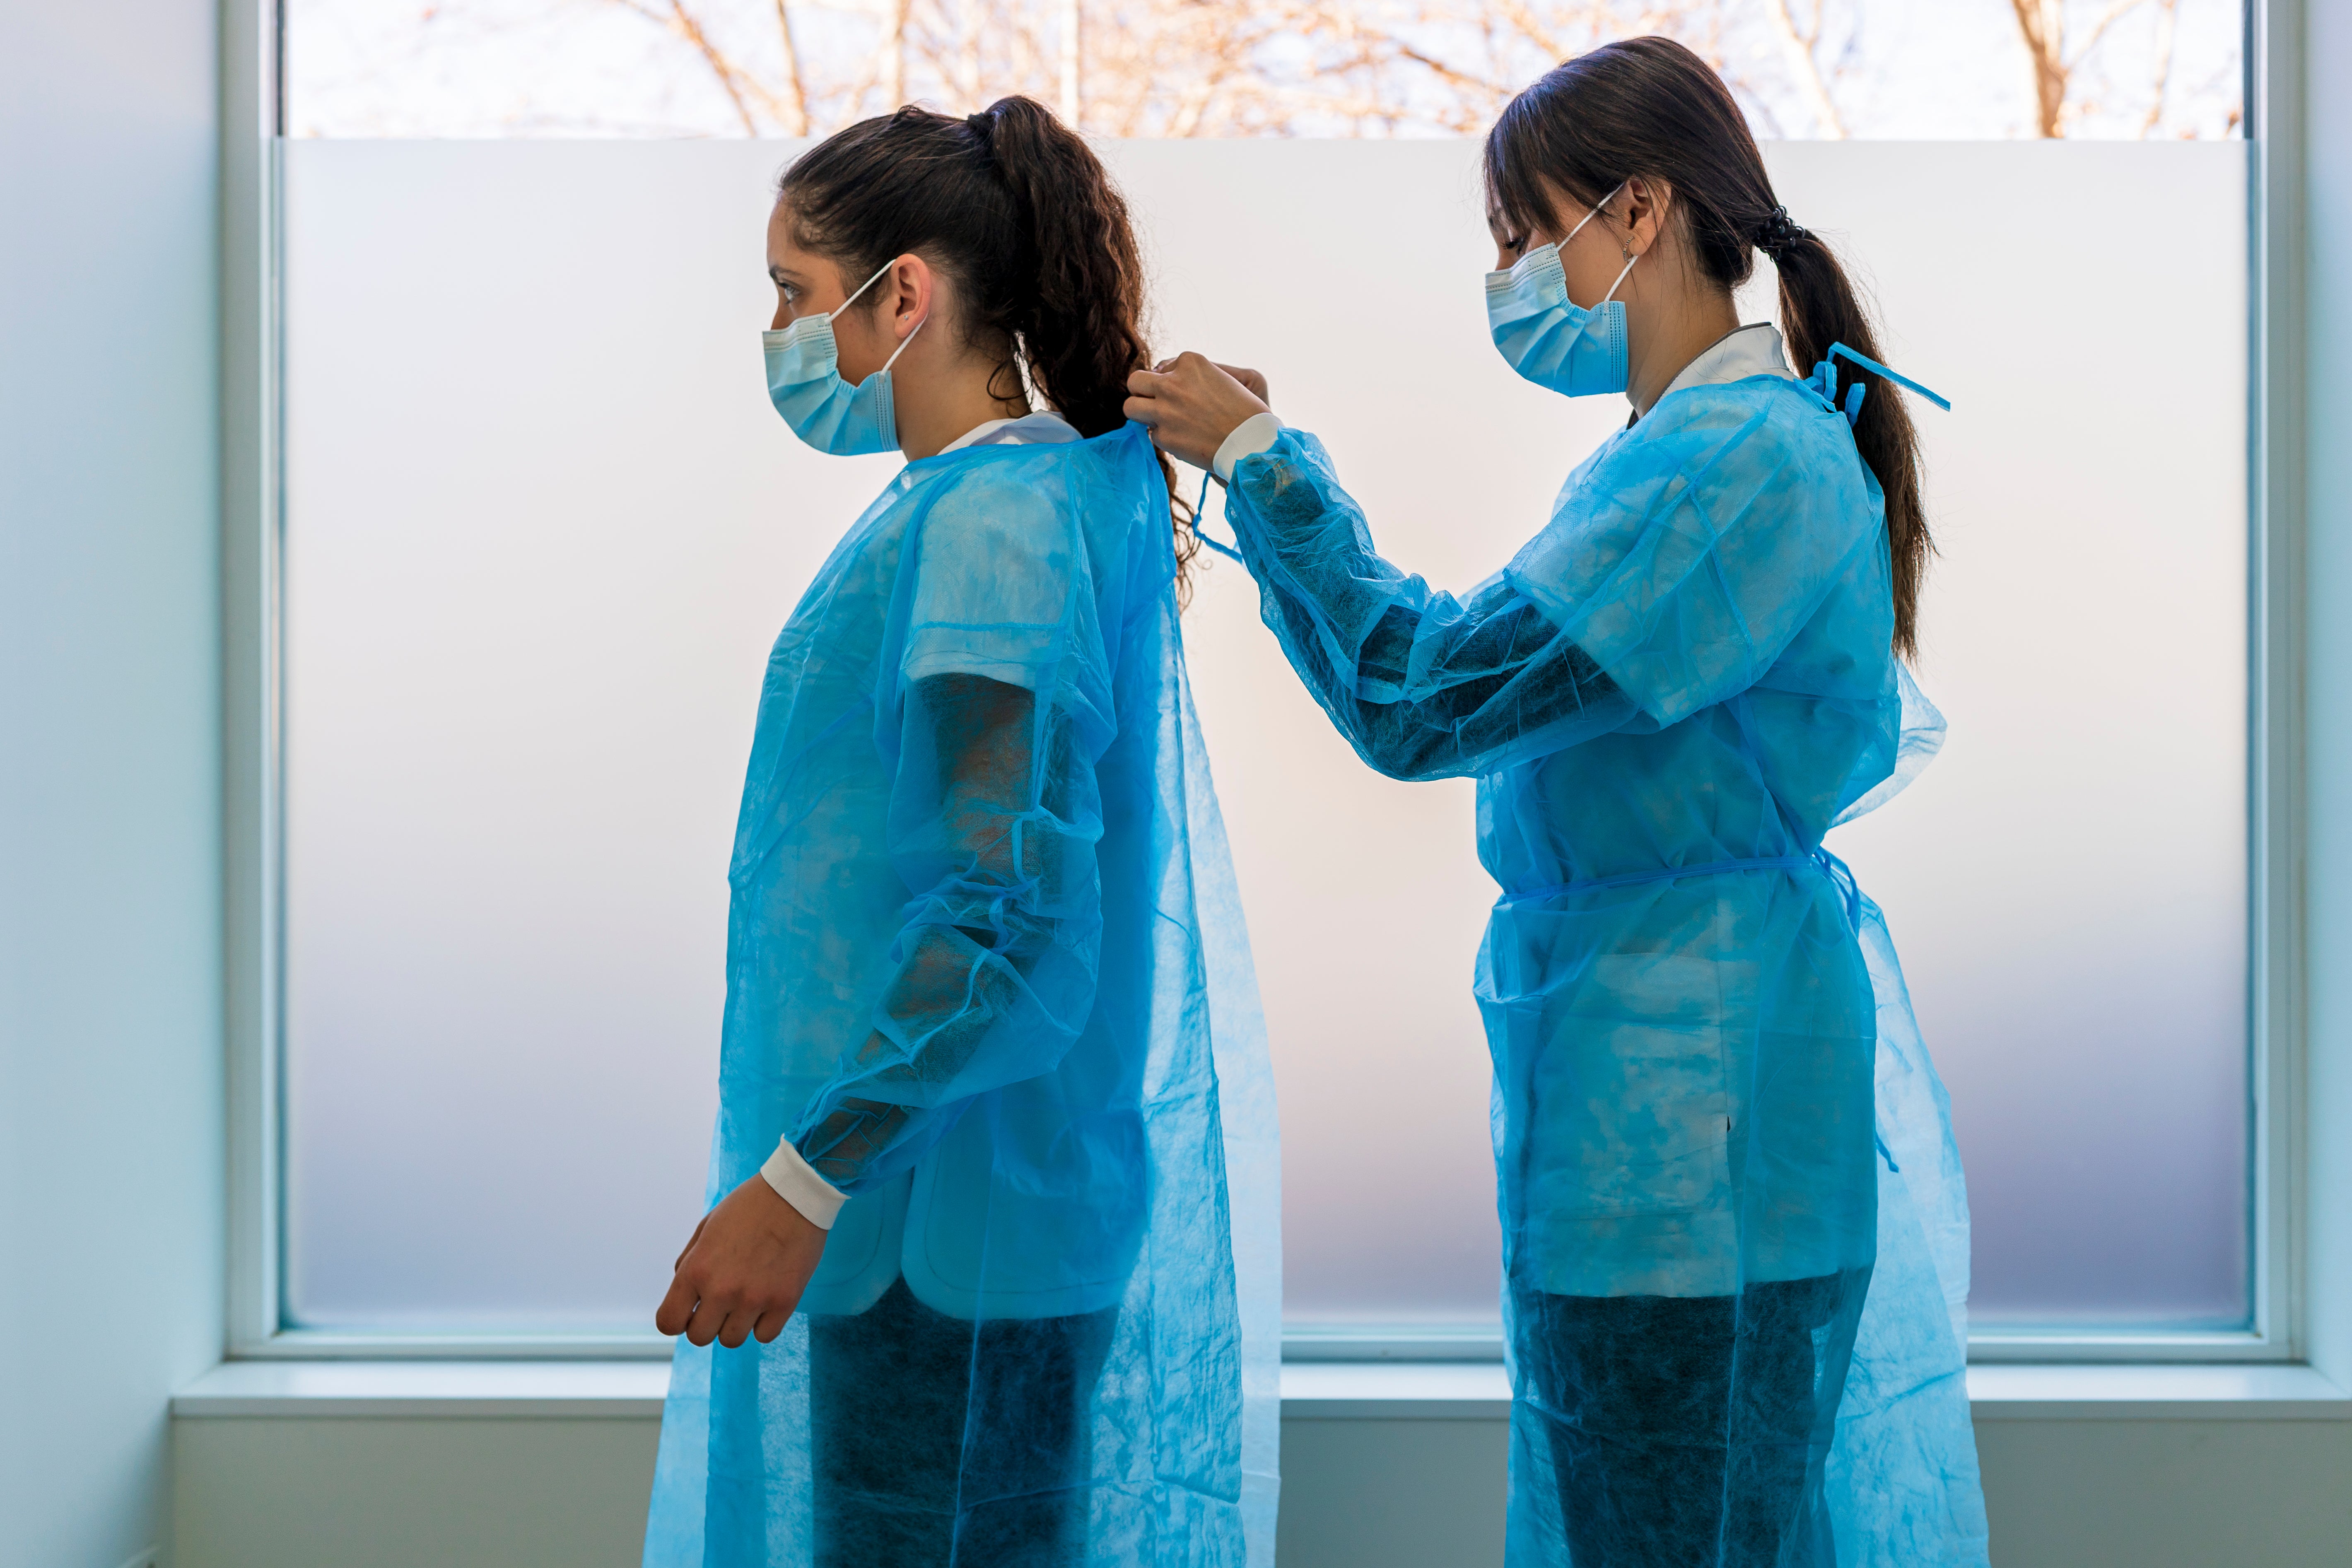 Louis Vuitton Is Making Medical Gowns for Frontline Hospital